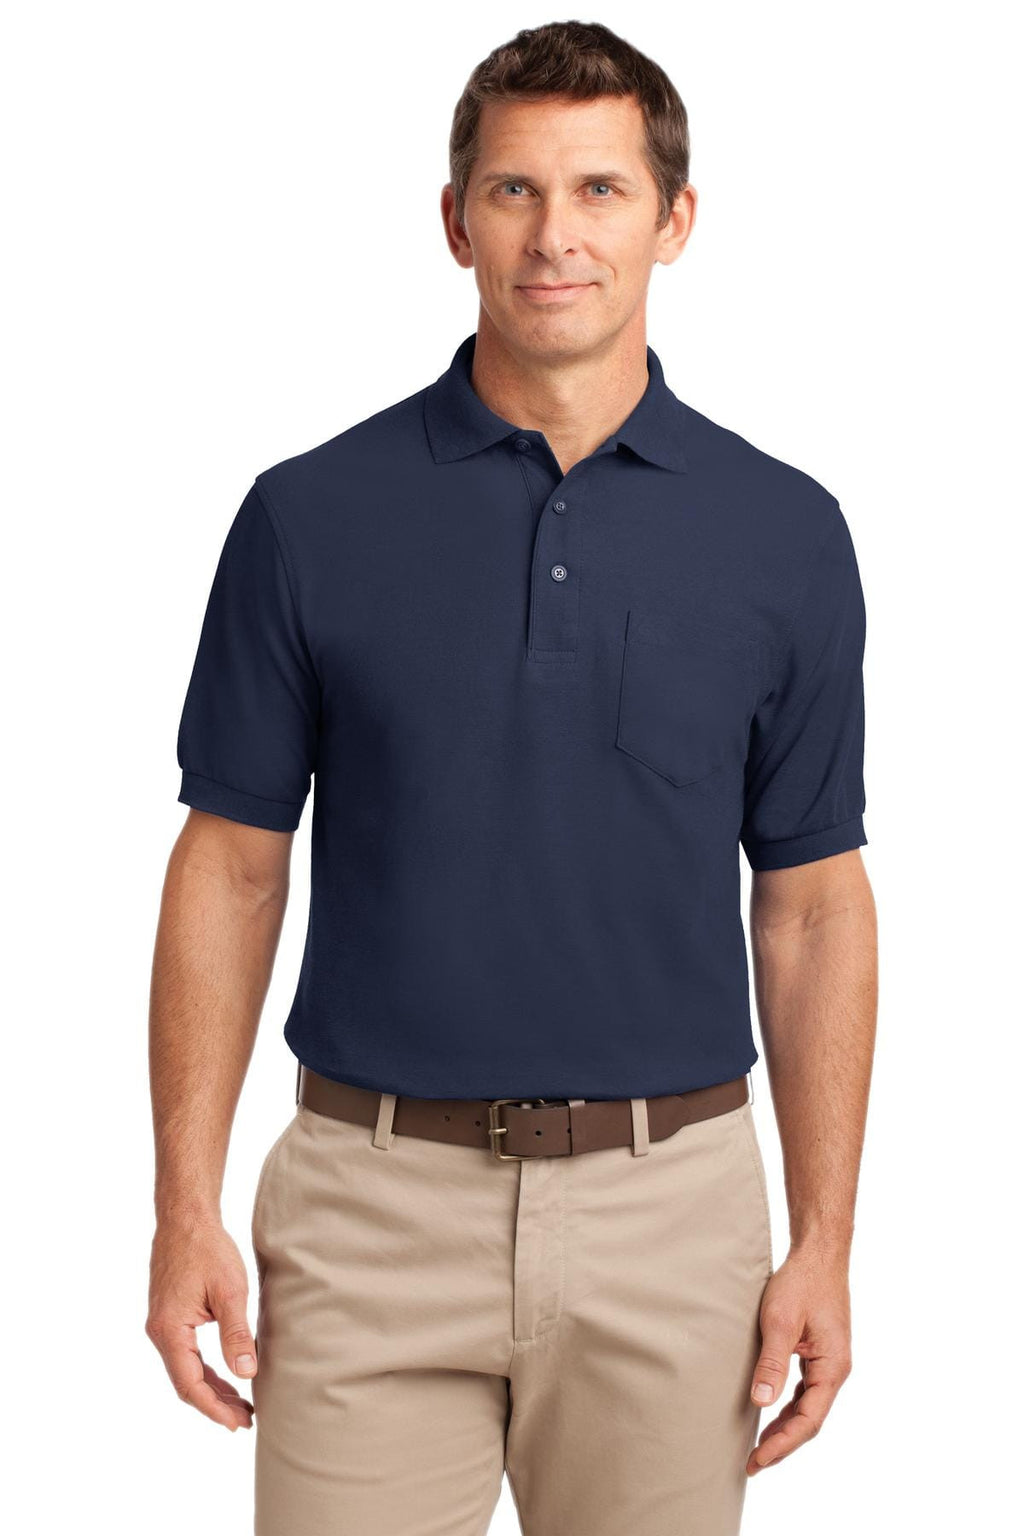 Port Authority Men's Silk Touch Polo Shirt With Pocket-2